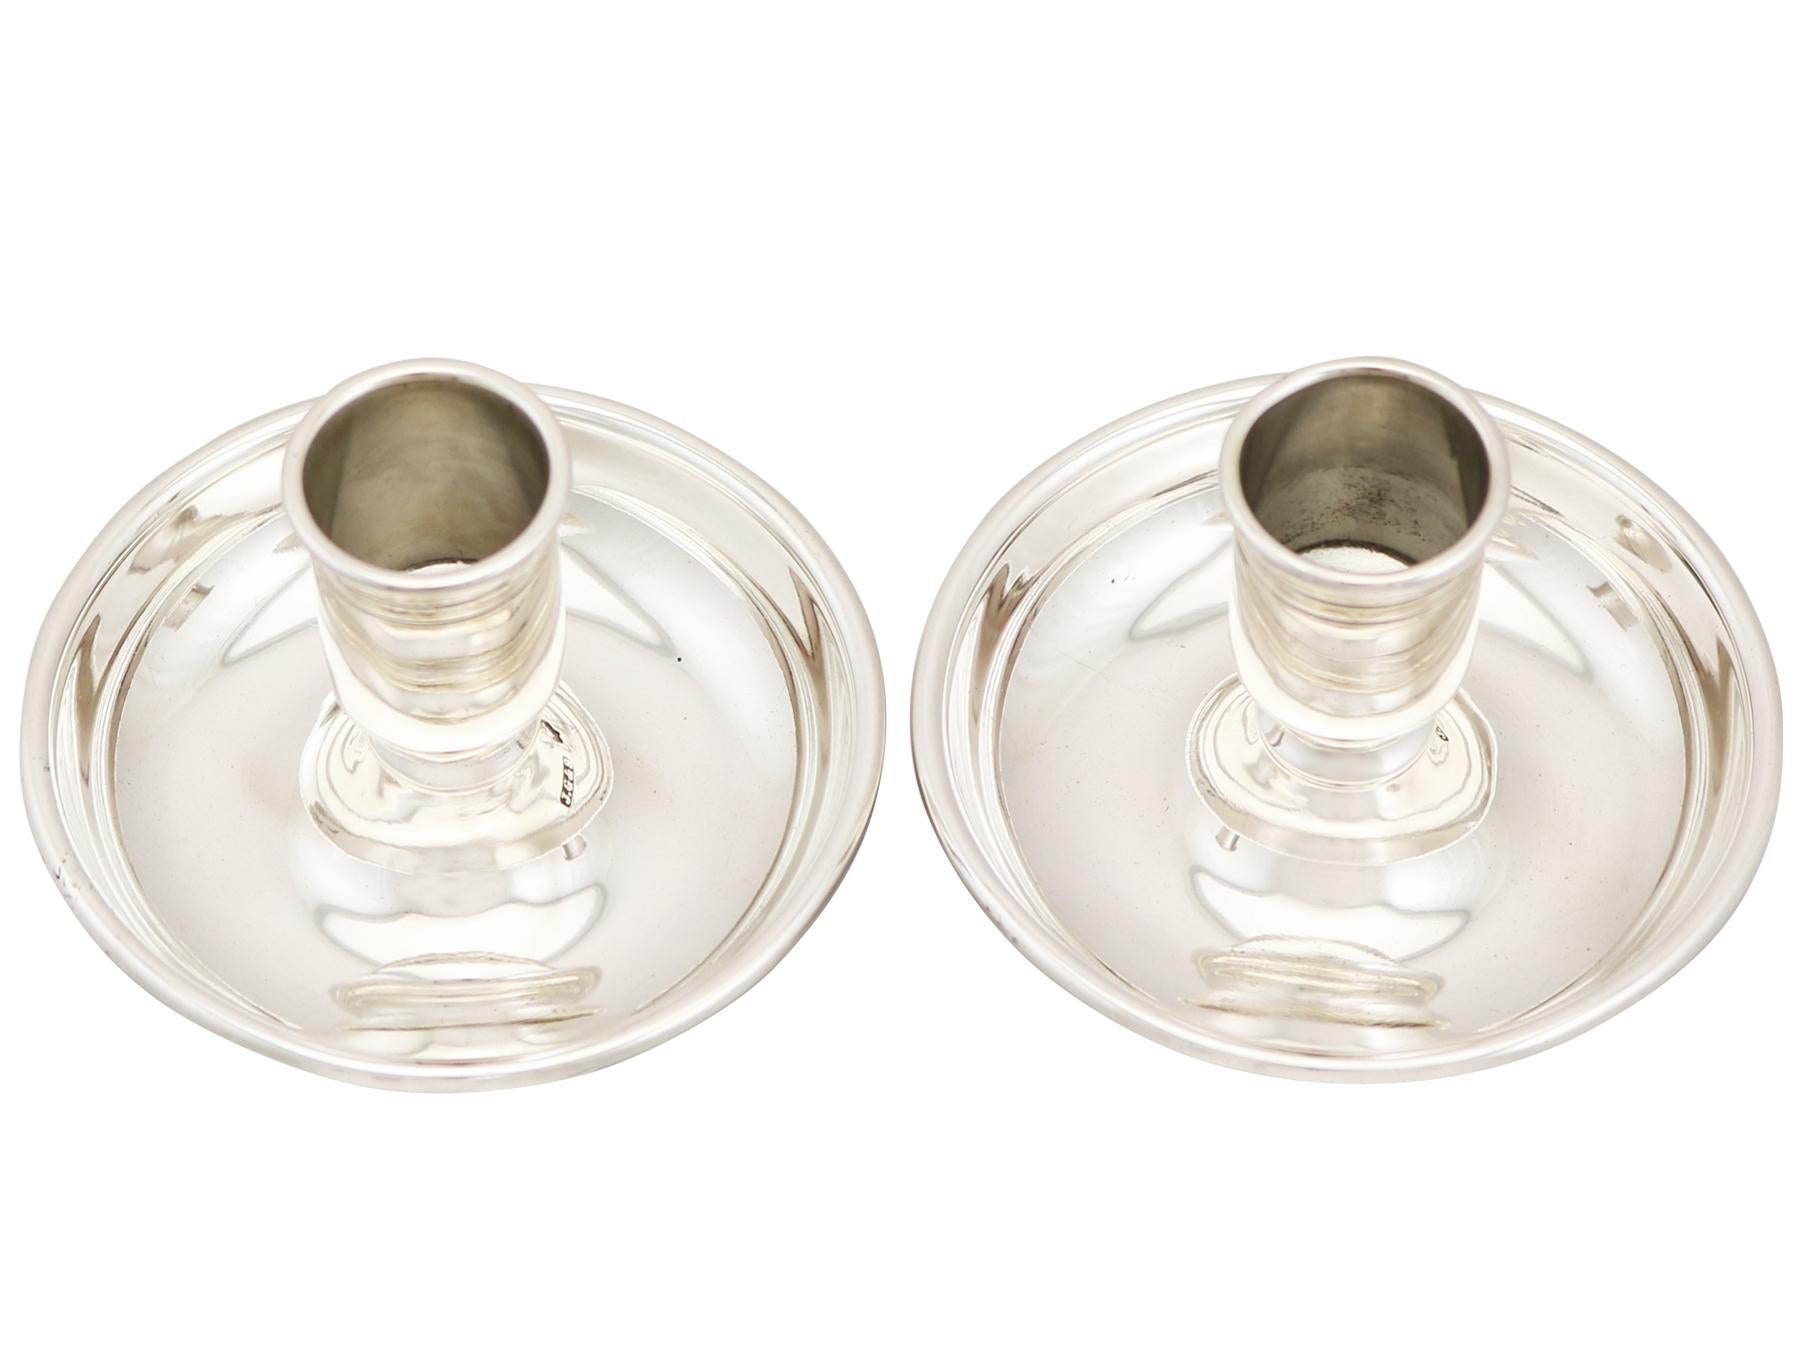 An exceptional, fine and impressive pair of antique Victorian English sterling silver travelling candlesticks; an addition to our ornamental silverware collection.

These exceptional antique Victorian sterling silver travelling candlesticks have a